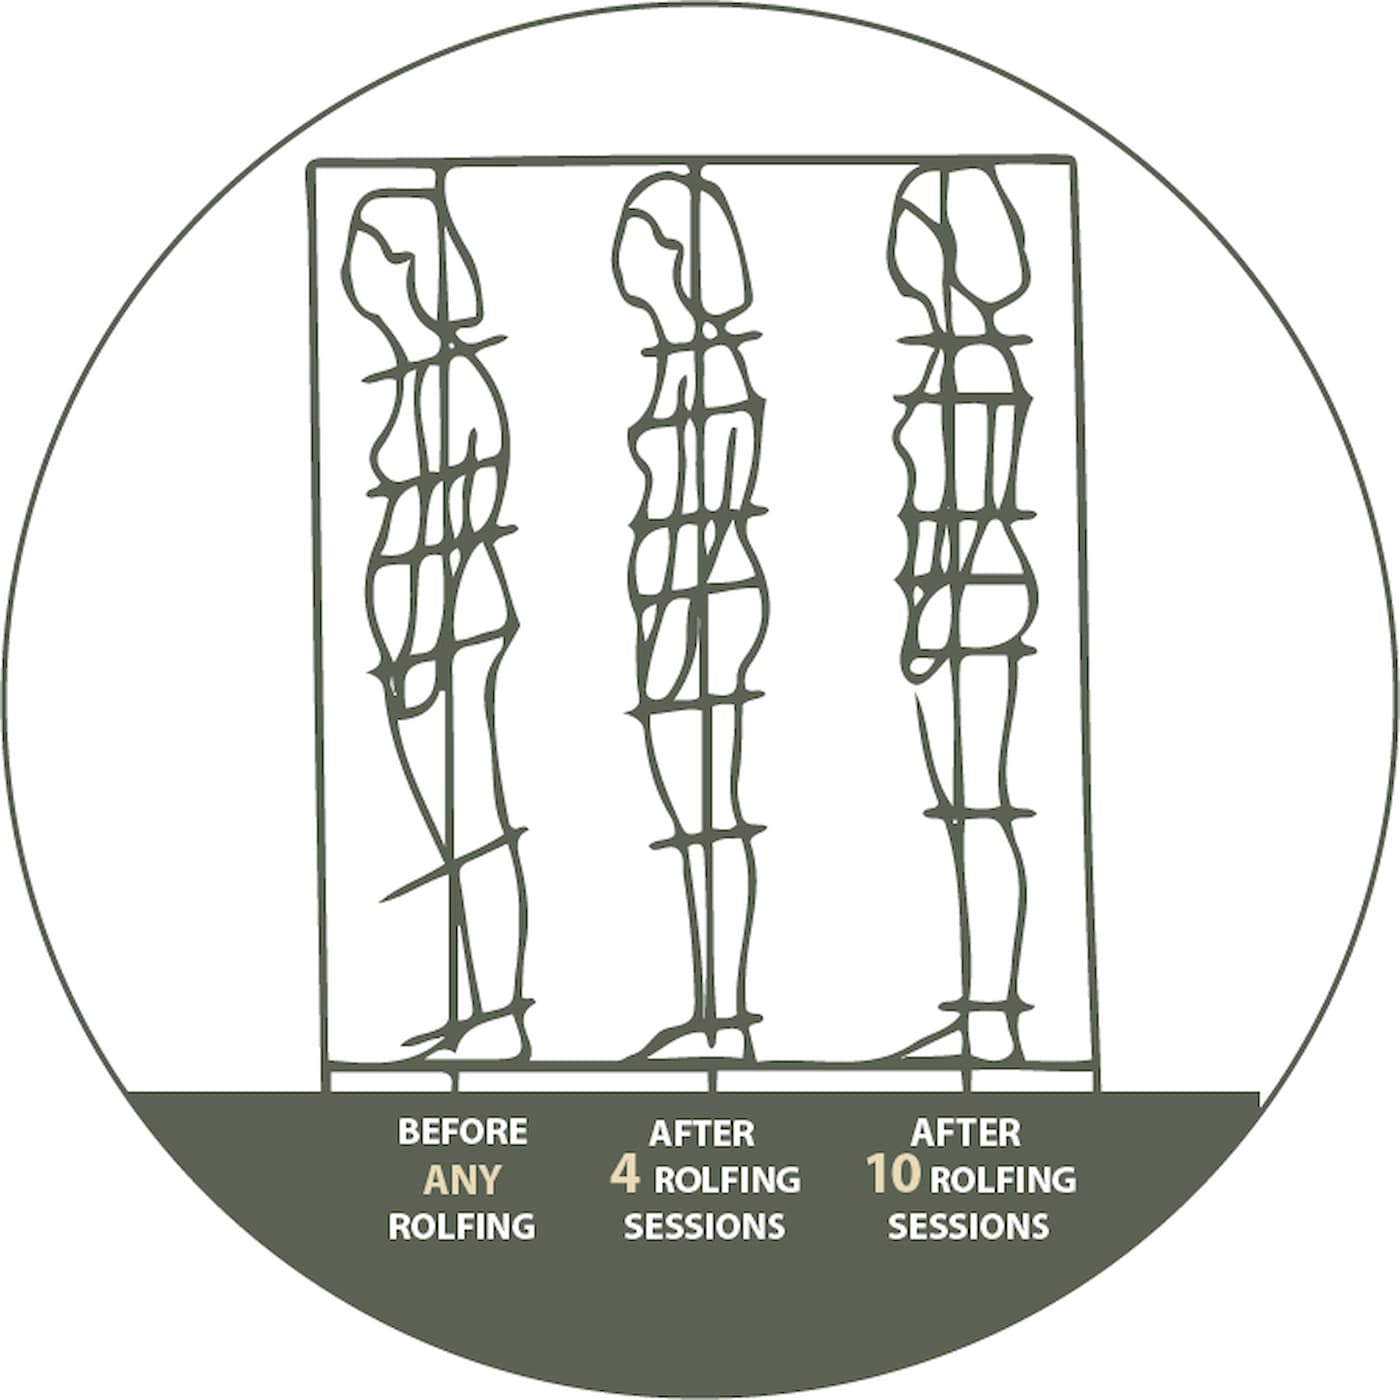 Posture Improvement from Rolfing over Time